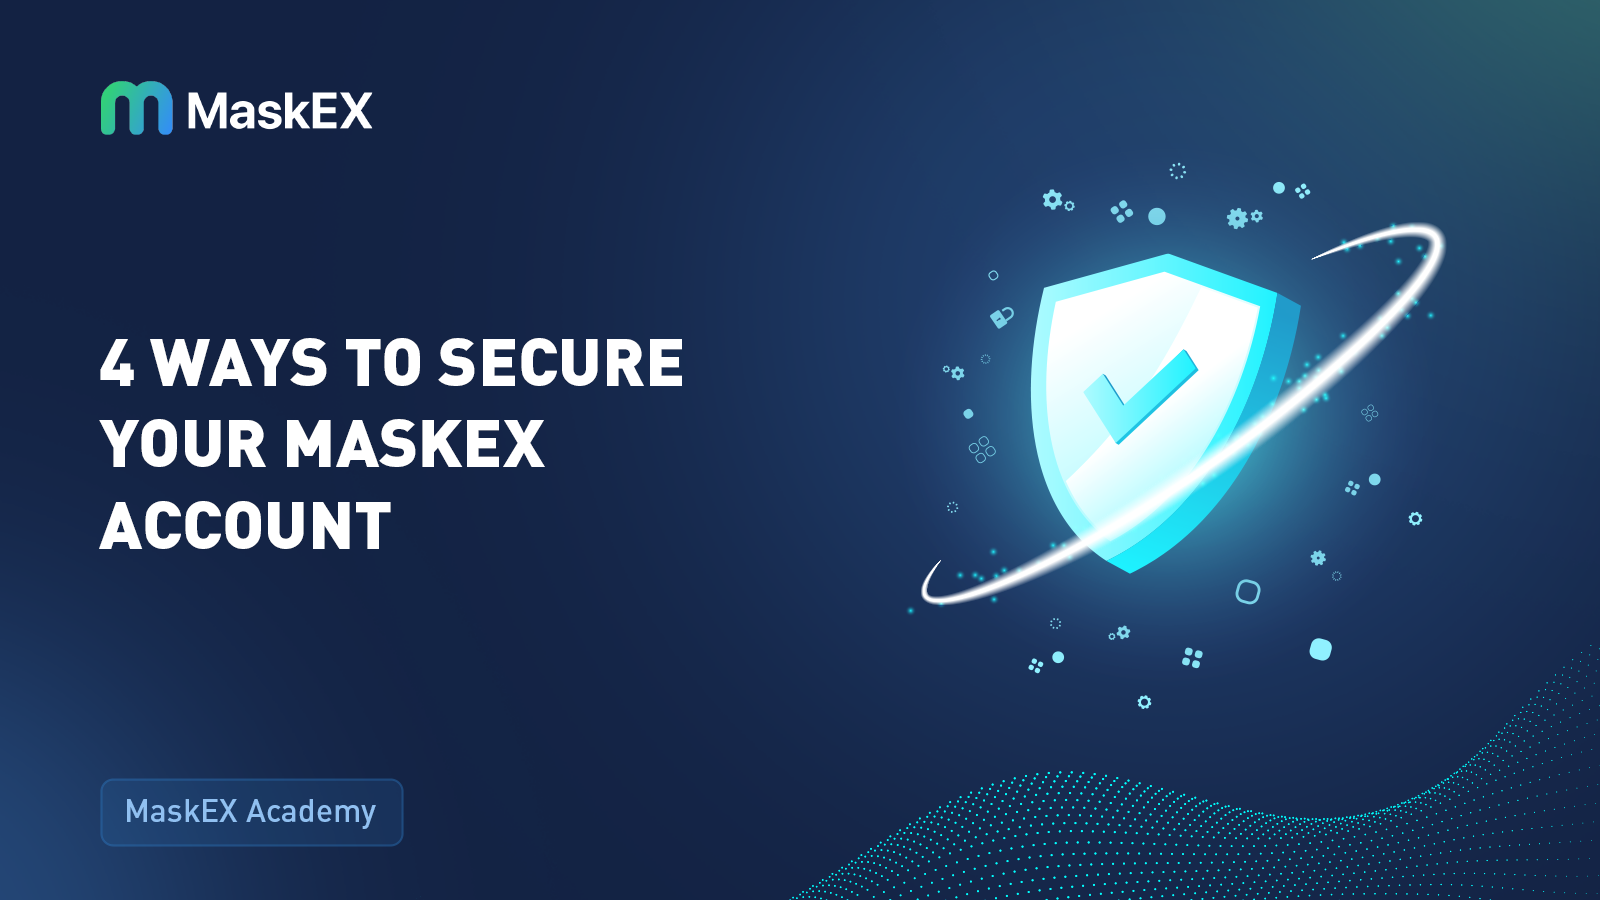 4 Ways to Secure your MaskEX Account